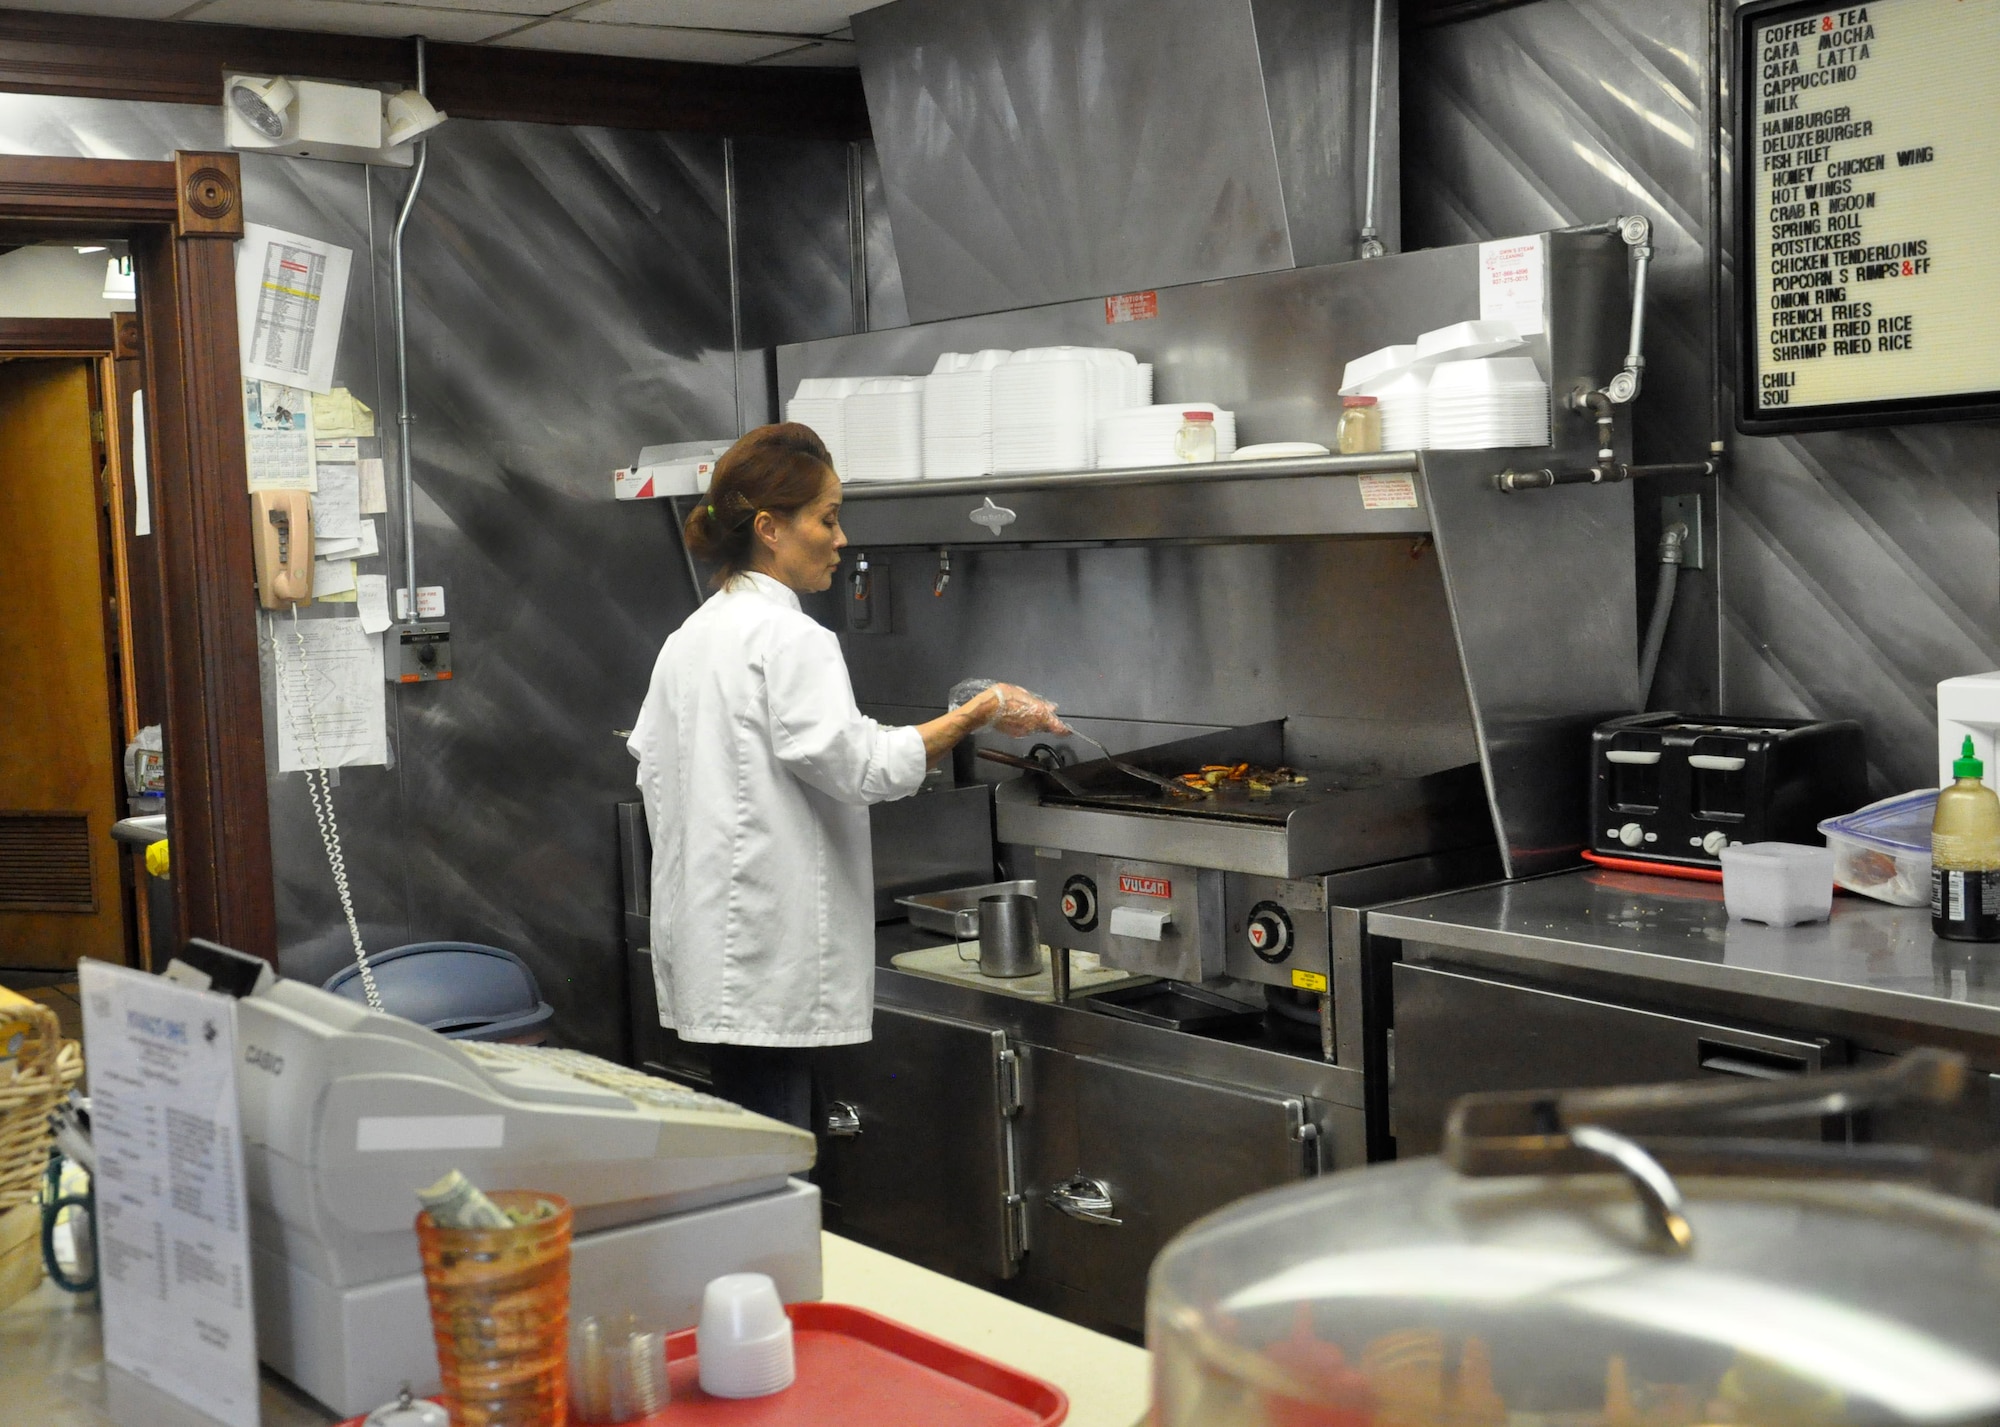 Ms. Young, owner of Young’s Café, prepares bulgogi, also known as Korean BBQ, for a customer at her restaurant inside Bldg. 22 on Area A of Wright-Patterson Air Force Base. Young’s Café is open 7 a.m.-2 p.m., offering a menu of Asian and American cuisine. (U.S. Air Force photo/Karina Brady)